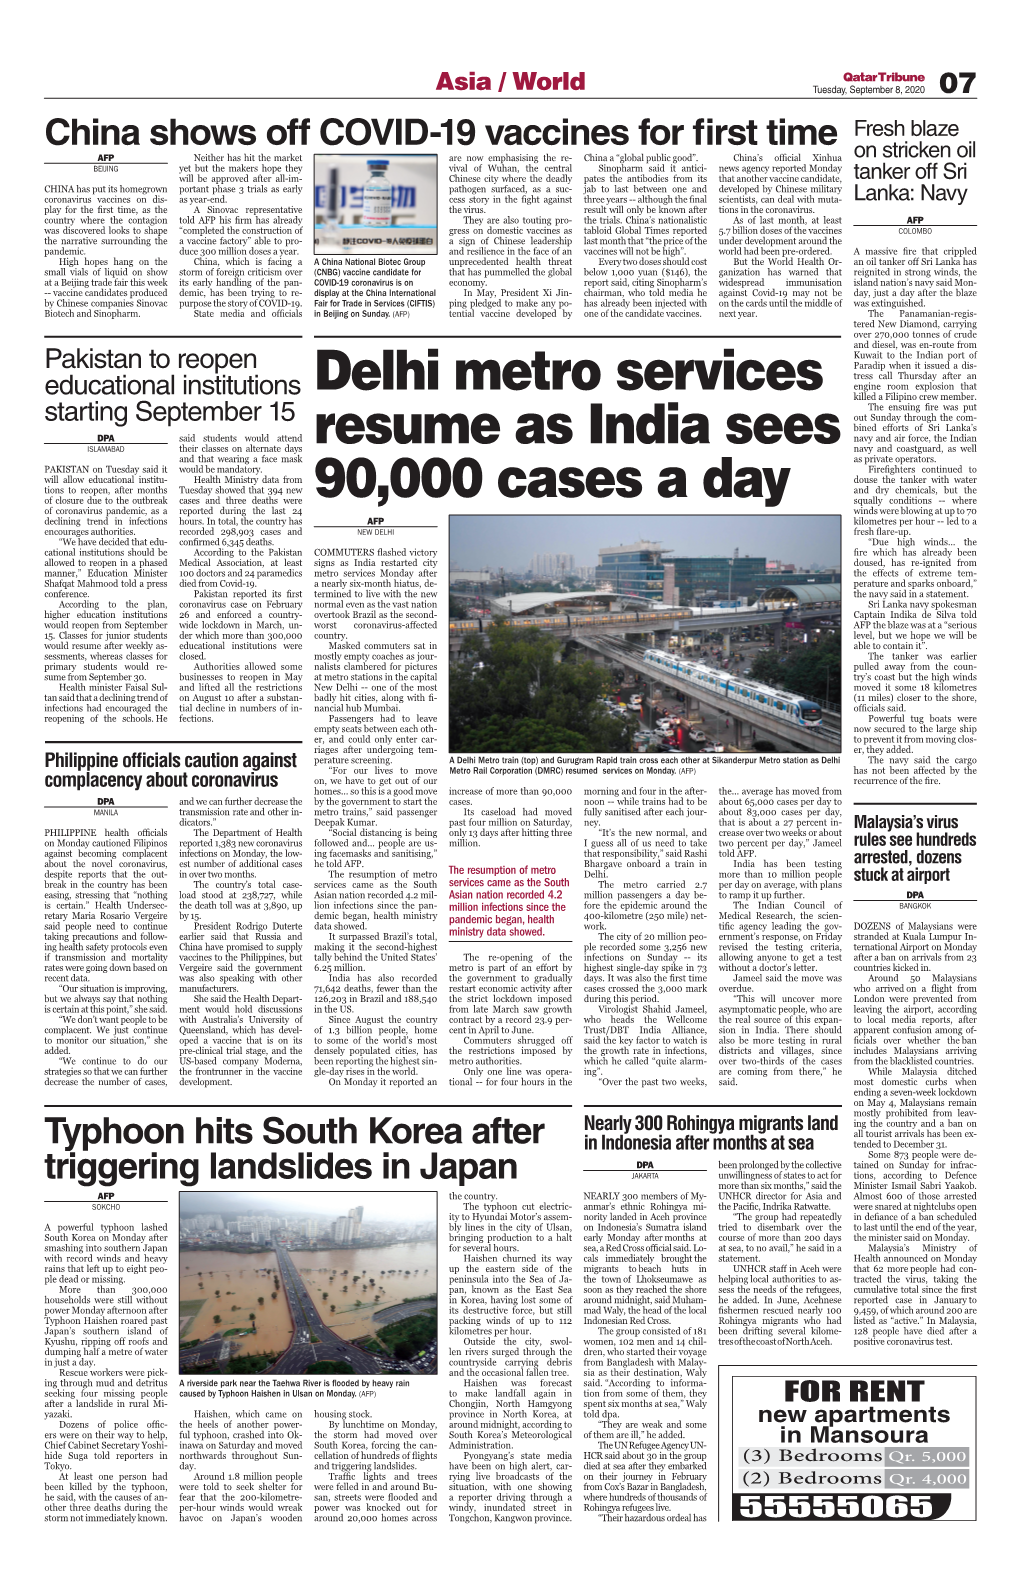 Delhi Metro Services Resume As India Sees 90,000 Cases A